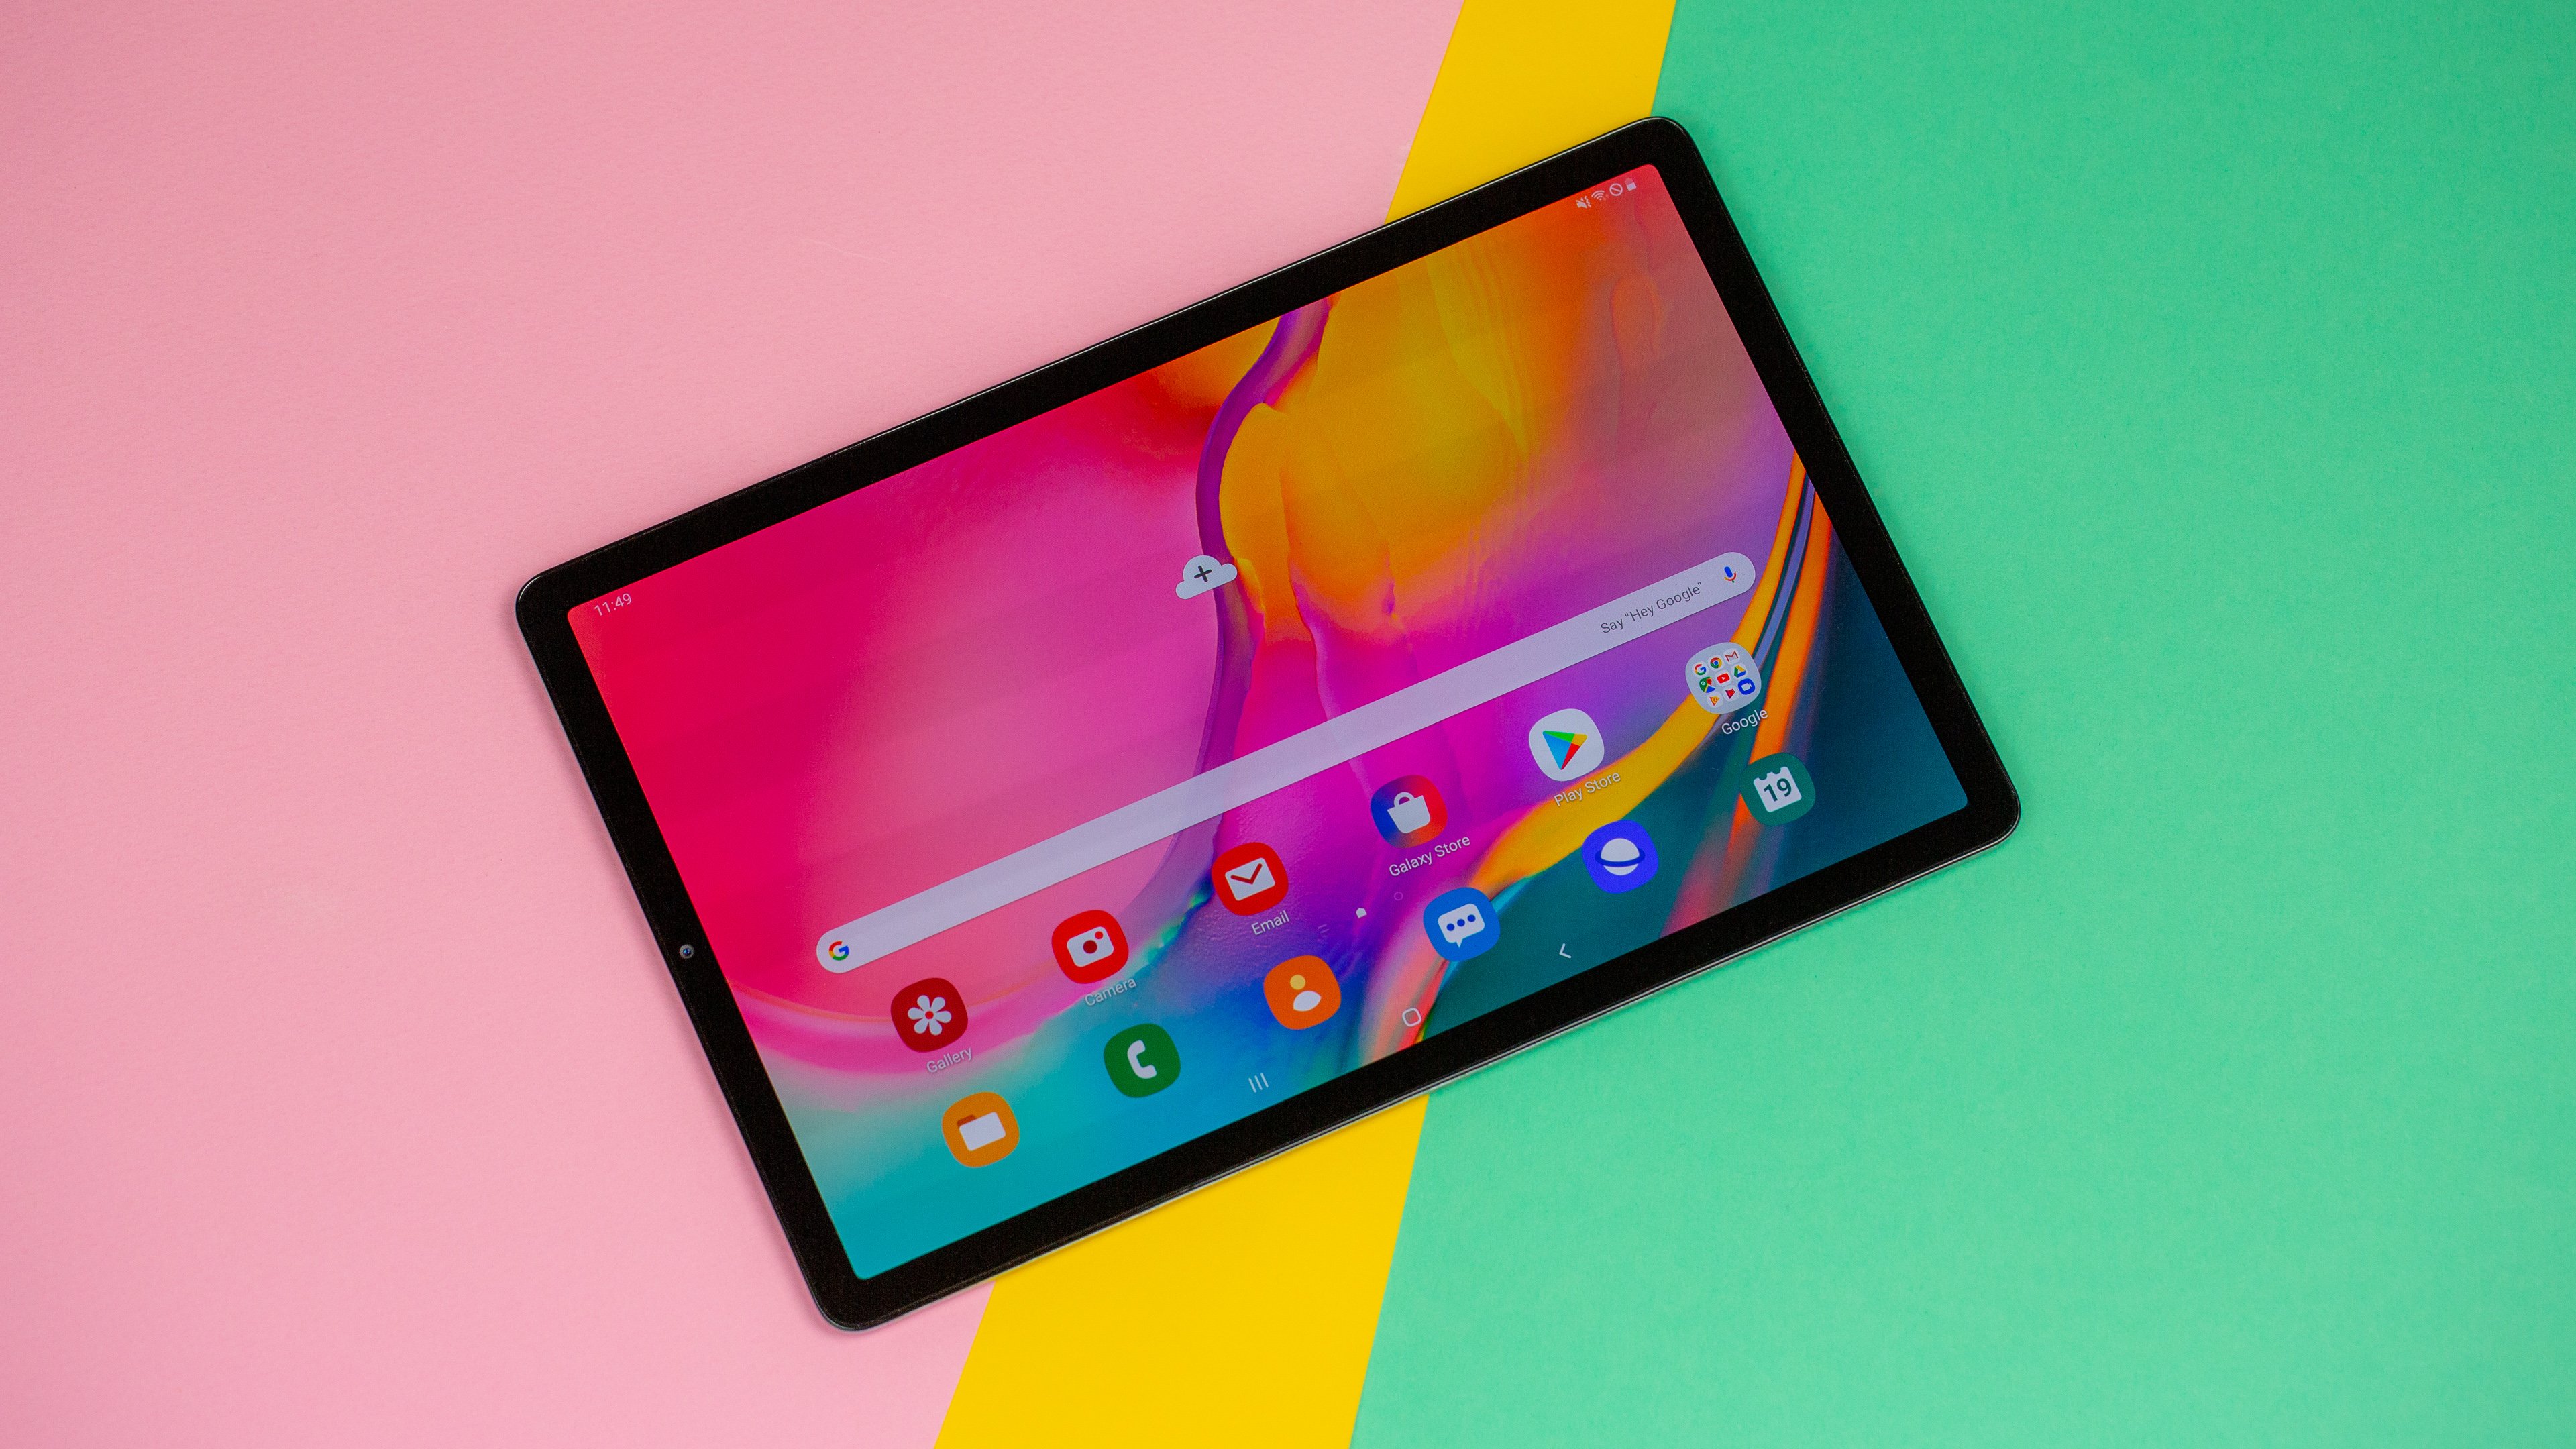 Samsung Galaxy Tab S5e review: pretty, light and the price is